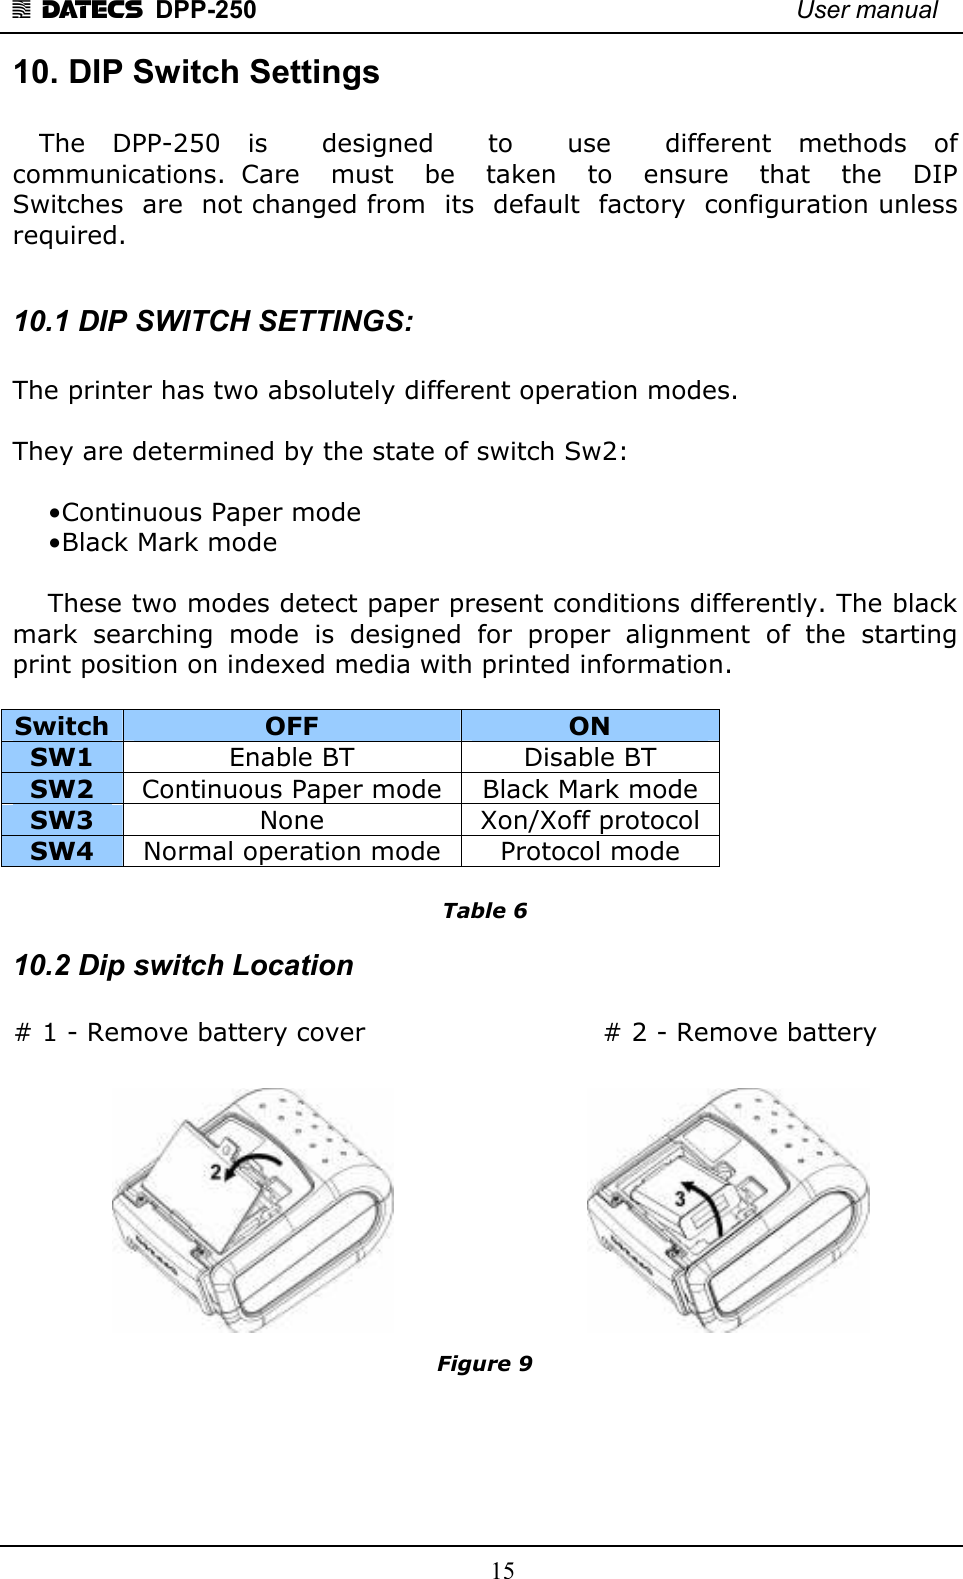 1 DATECS  DPP-250    User manual     15 10. DIP Switch Settings     The  DPP-250  is    designed    to    use    different  methods  of communications.  Care    must    be    taken    to    ensure    that    the    DIP Switches  are  not changed from  its  default  factory  configuration unless required.  10.1 DIP SWITCH SETTINGS:   The printer has two absolutely different operation modes.    They are determined by the state of switch Sw2:       •Continuous Paper mode      •Black Mark mode       These two modes detect paper present conditions differently. The black mark  searching  mode  is  designed  for  proper  alignment  of  the  starting print position on indexed media with printed information.  Switch OFF  ON SW1  Enable BT  Disable BT SW2  Continuous Paper mode  Black Mark mode SW3  None  Xon/Xoff protocol SW4  Normal operation mode  Protocol mode  Table 6 10.2 Dip switch Location  # 1 - Remove battery cover                           # 2 - Remove battery           Figure 9      